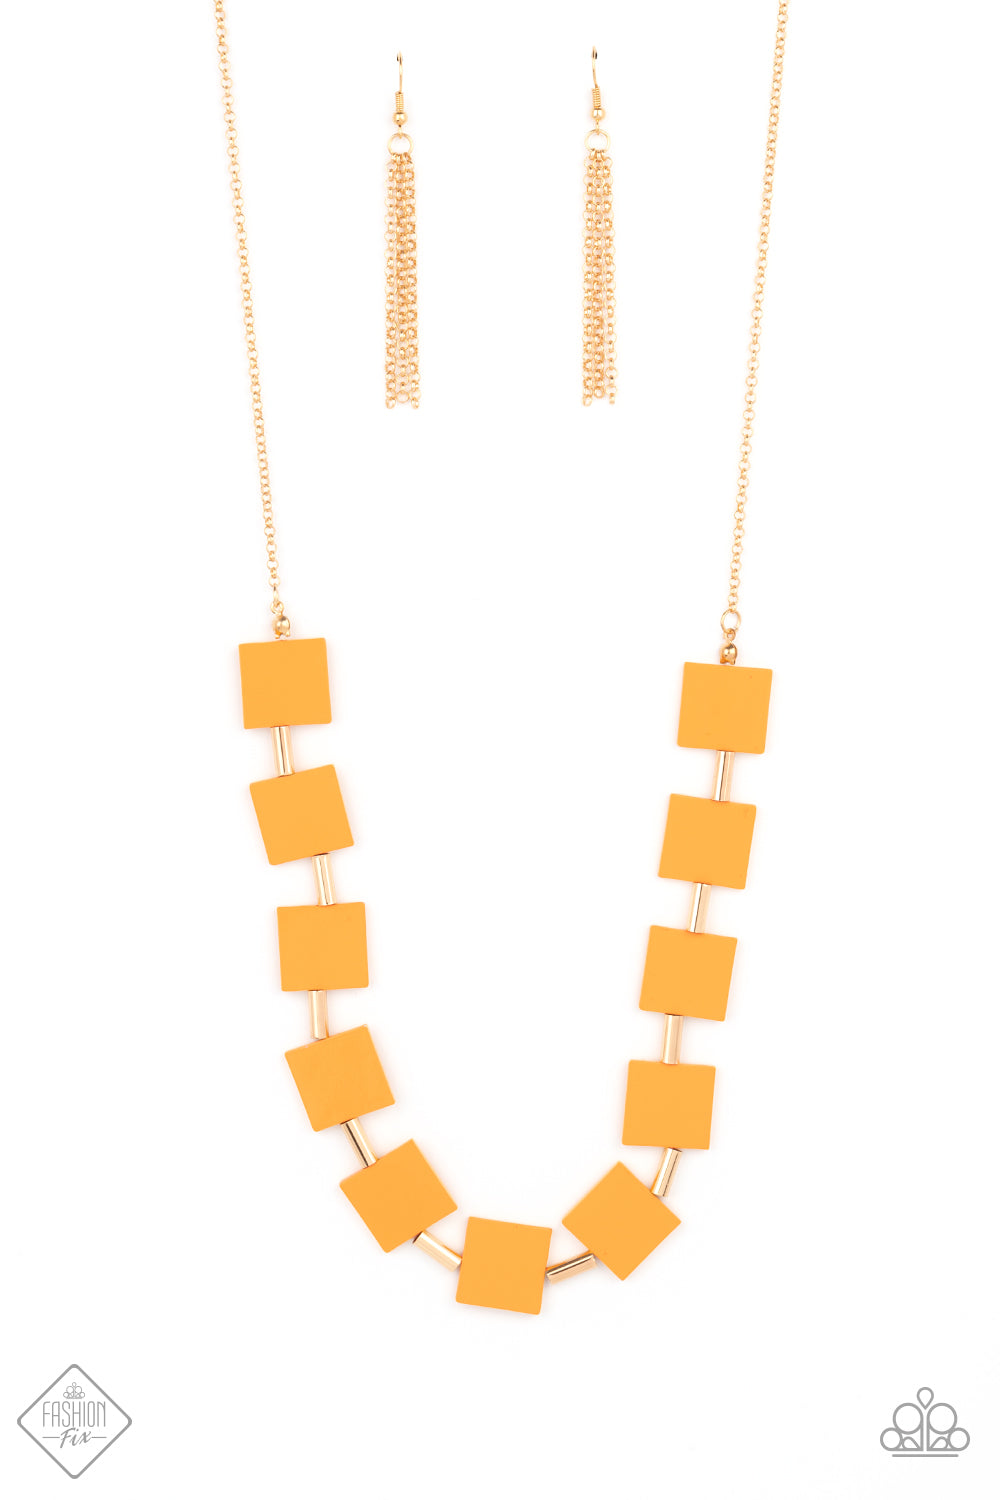 Paparazzi Hello, Material Girl Orange Necklace $5 Accessories. Get Free Shipping. #P2SE-OGXX-258ZX